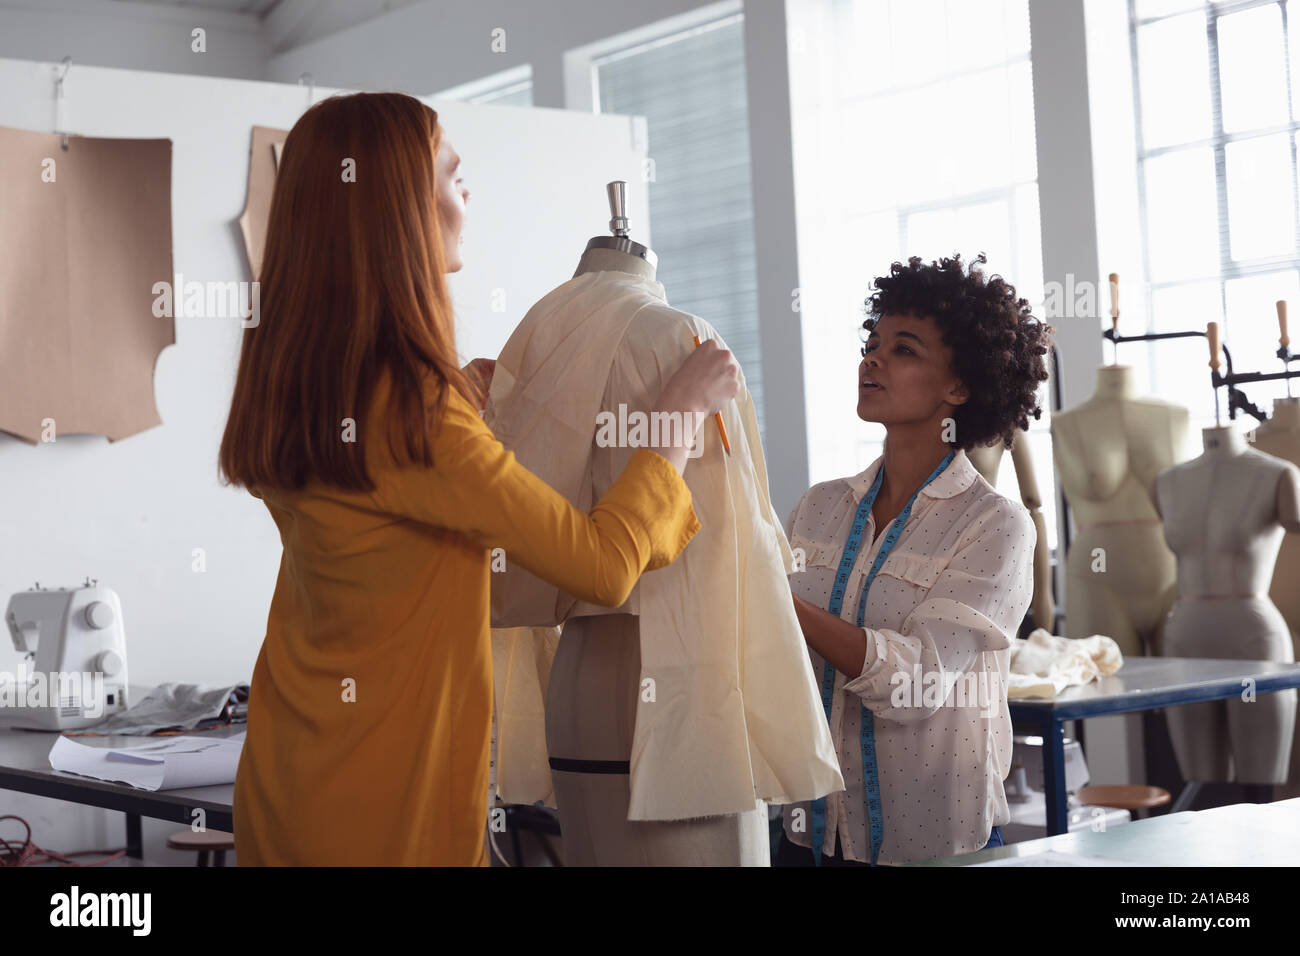 Female students working on a garment at a fashion college Stock Photo